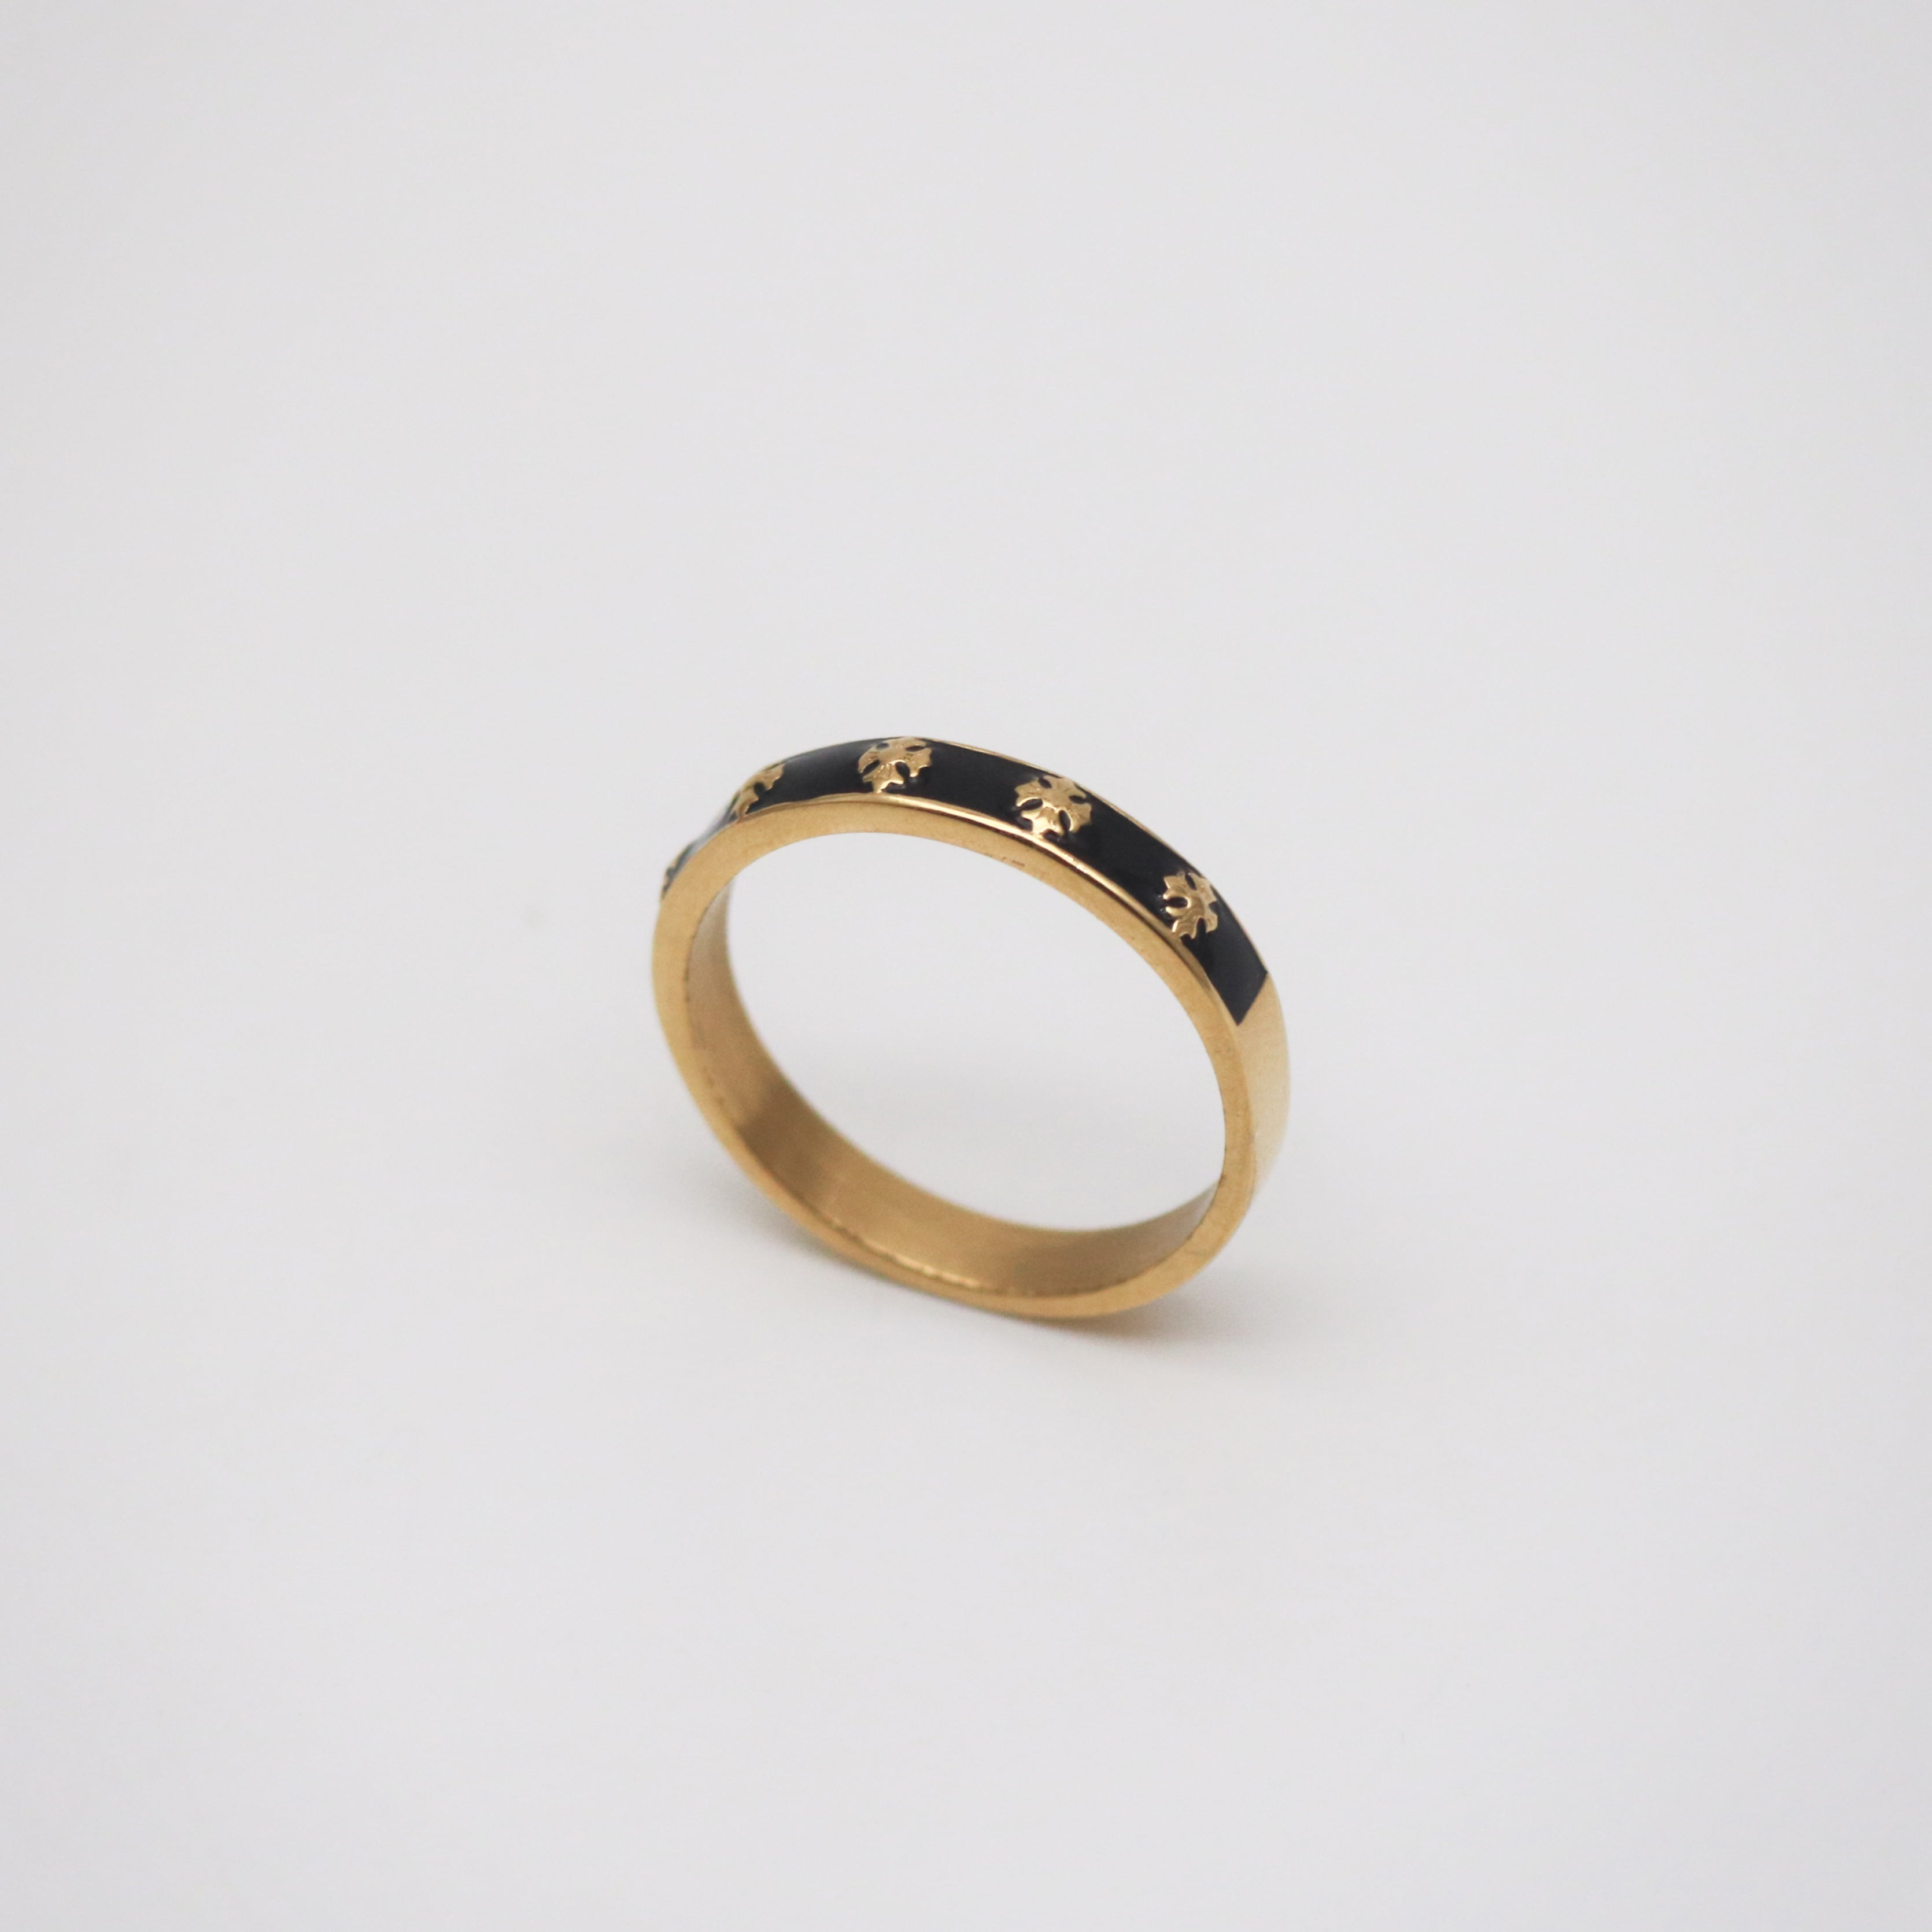 thin gold band ring with black enamel and cross patterns